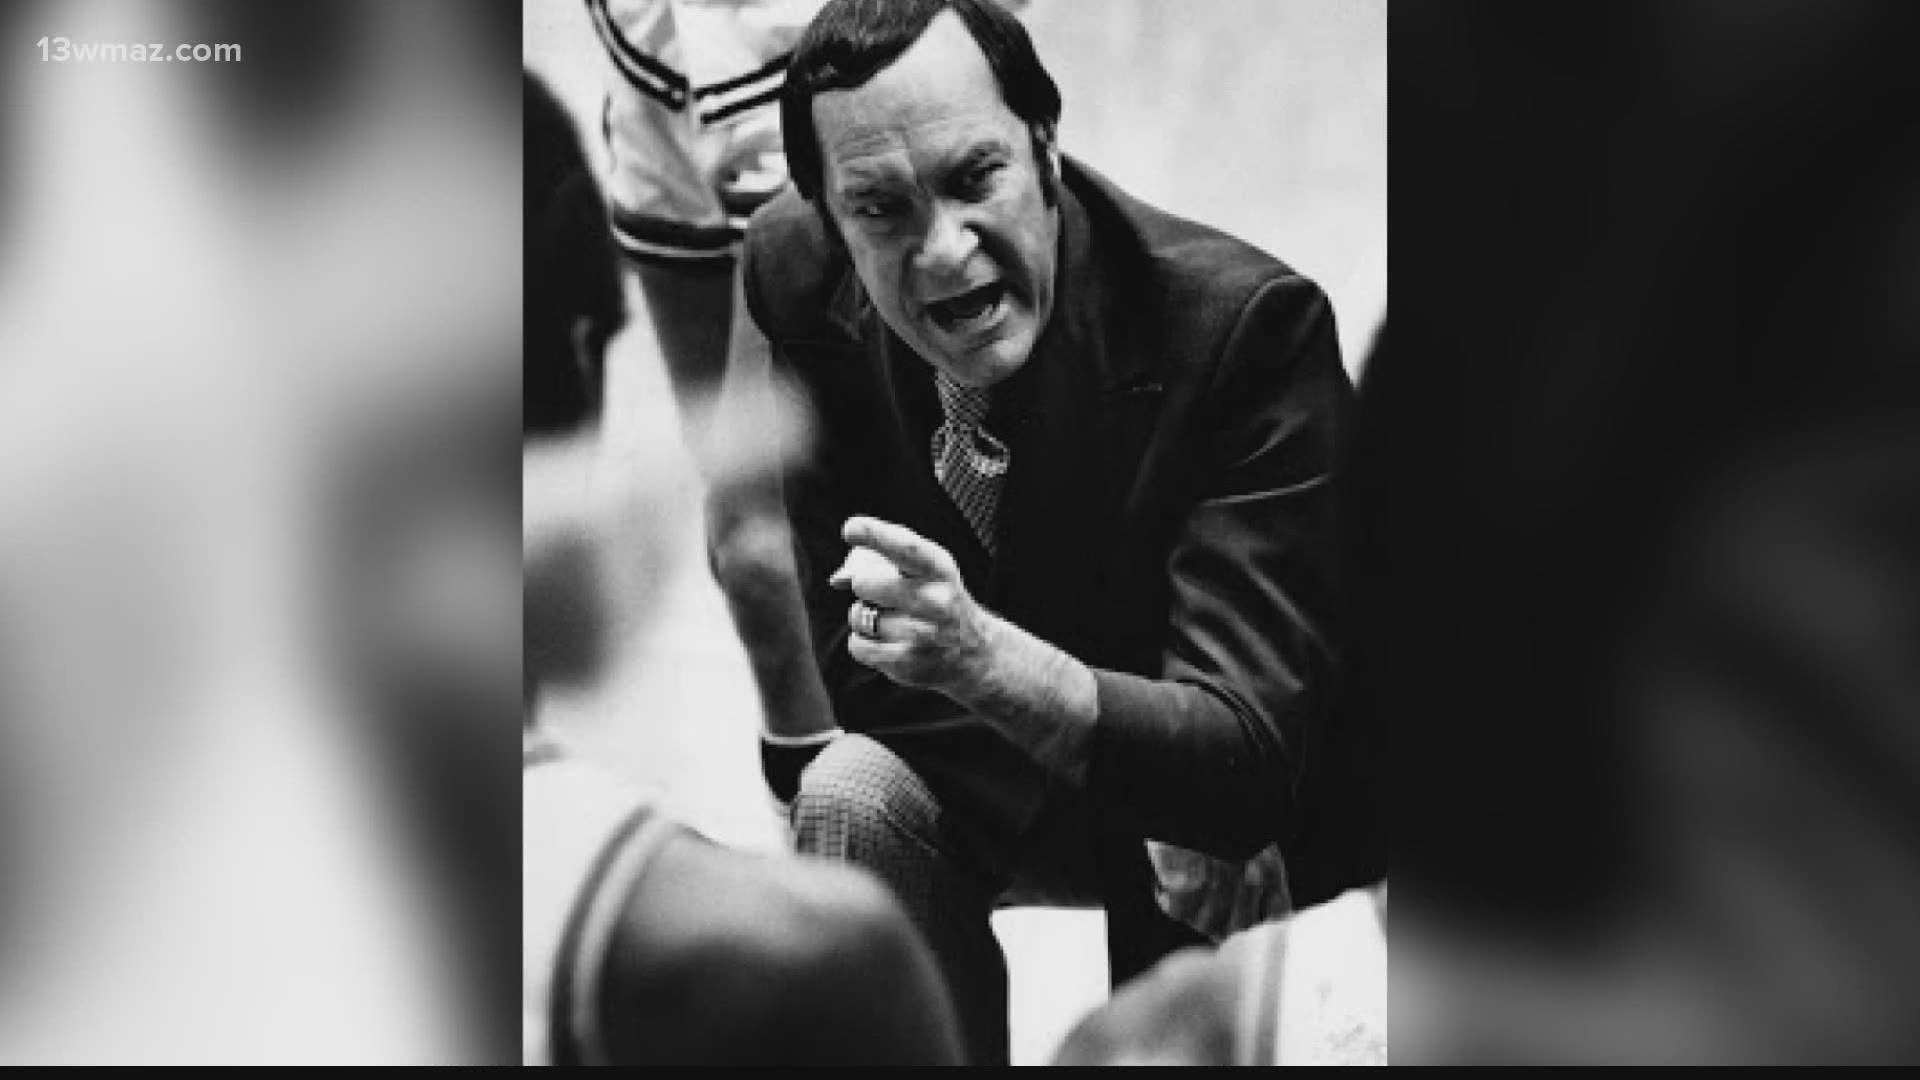 Former men's basketball head coach at Mercer University, Bill Bibb, died Thursday afternoon at the age of 86.